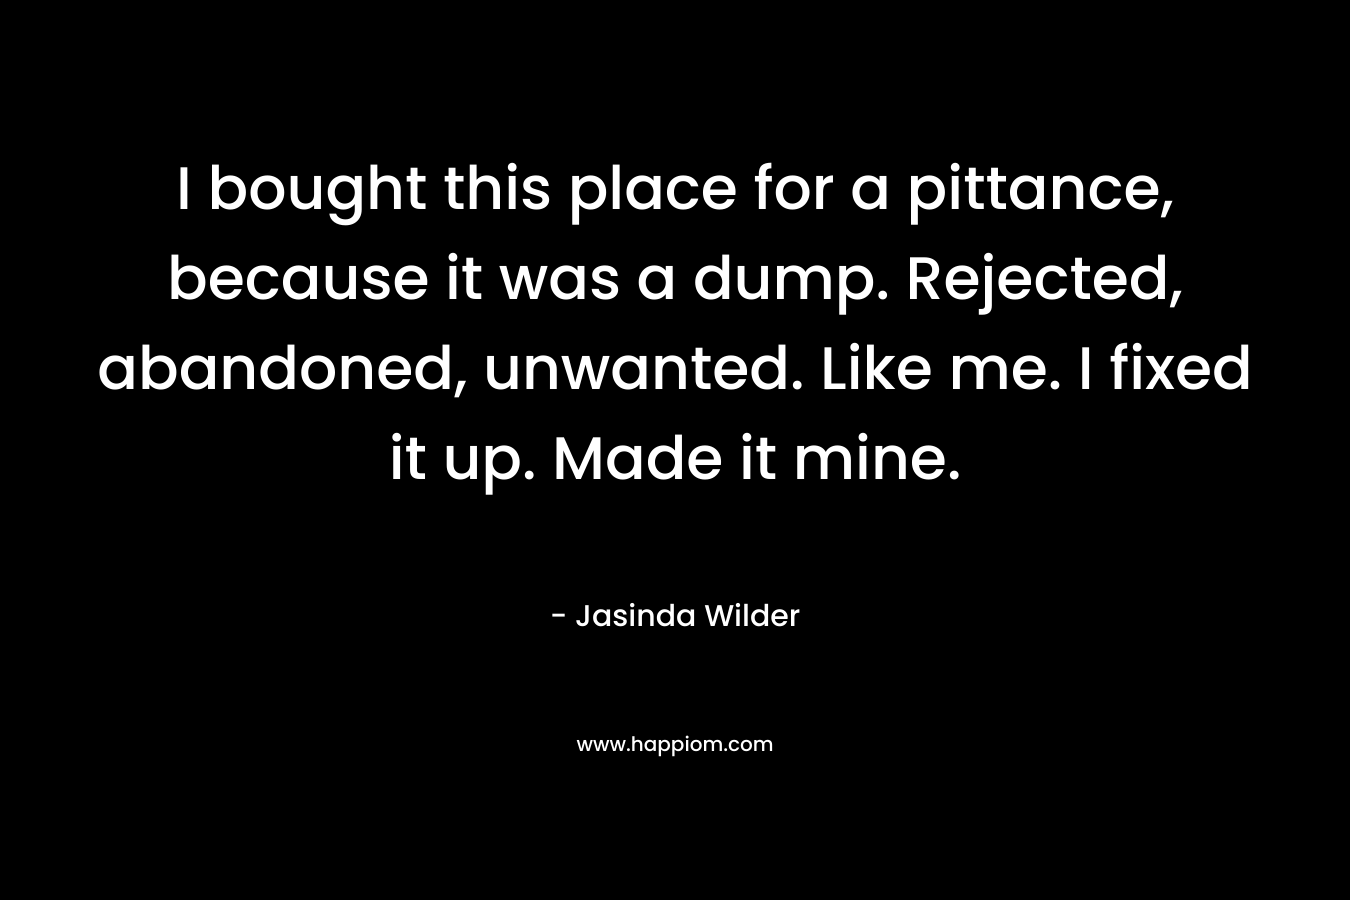 I bought this place for a pittance, because it was a dump. Rejected, abandoned, unwanted. Like me. I fixed it up. Made it mine. – Jasinda Wilder